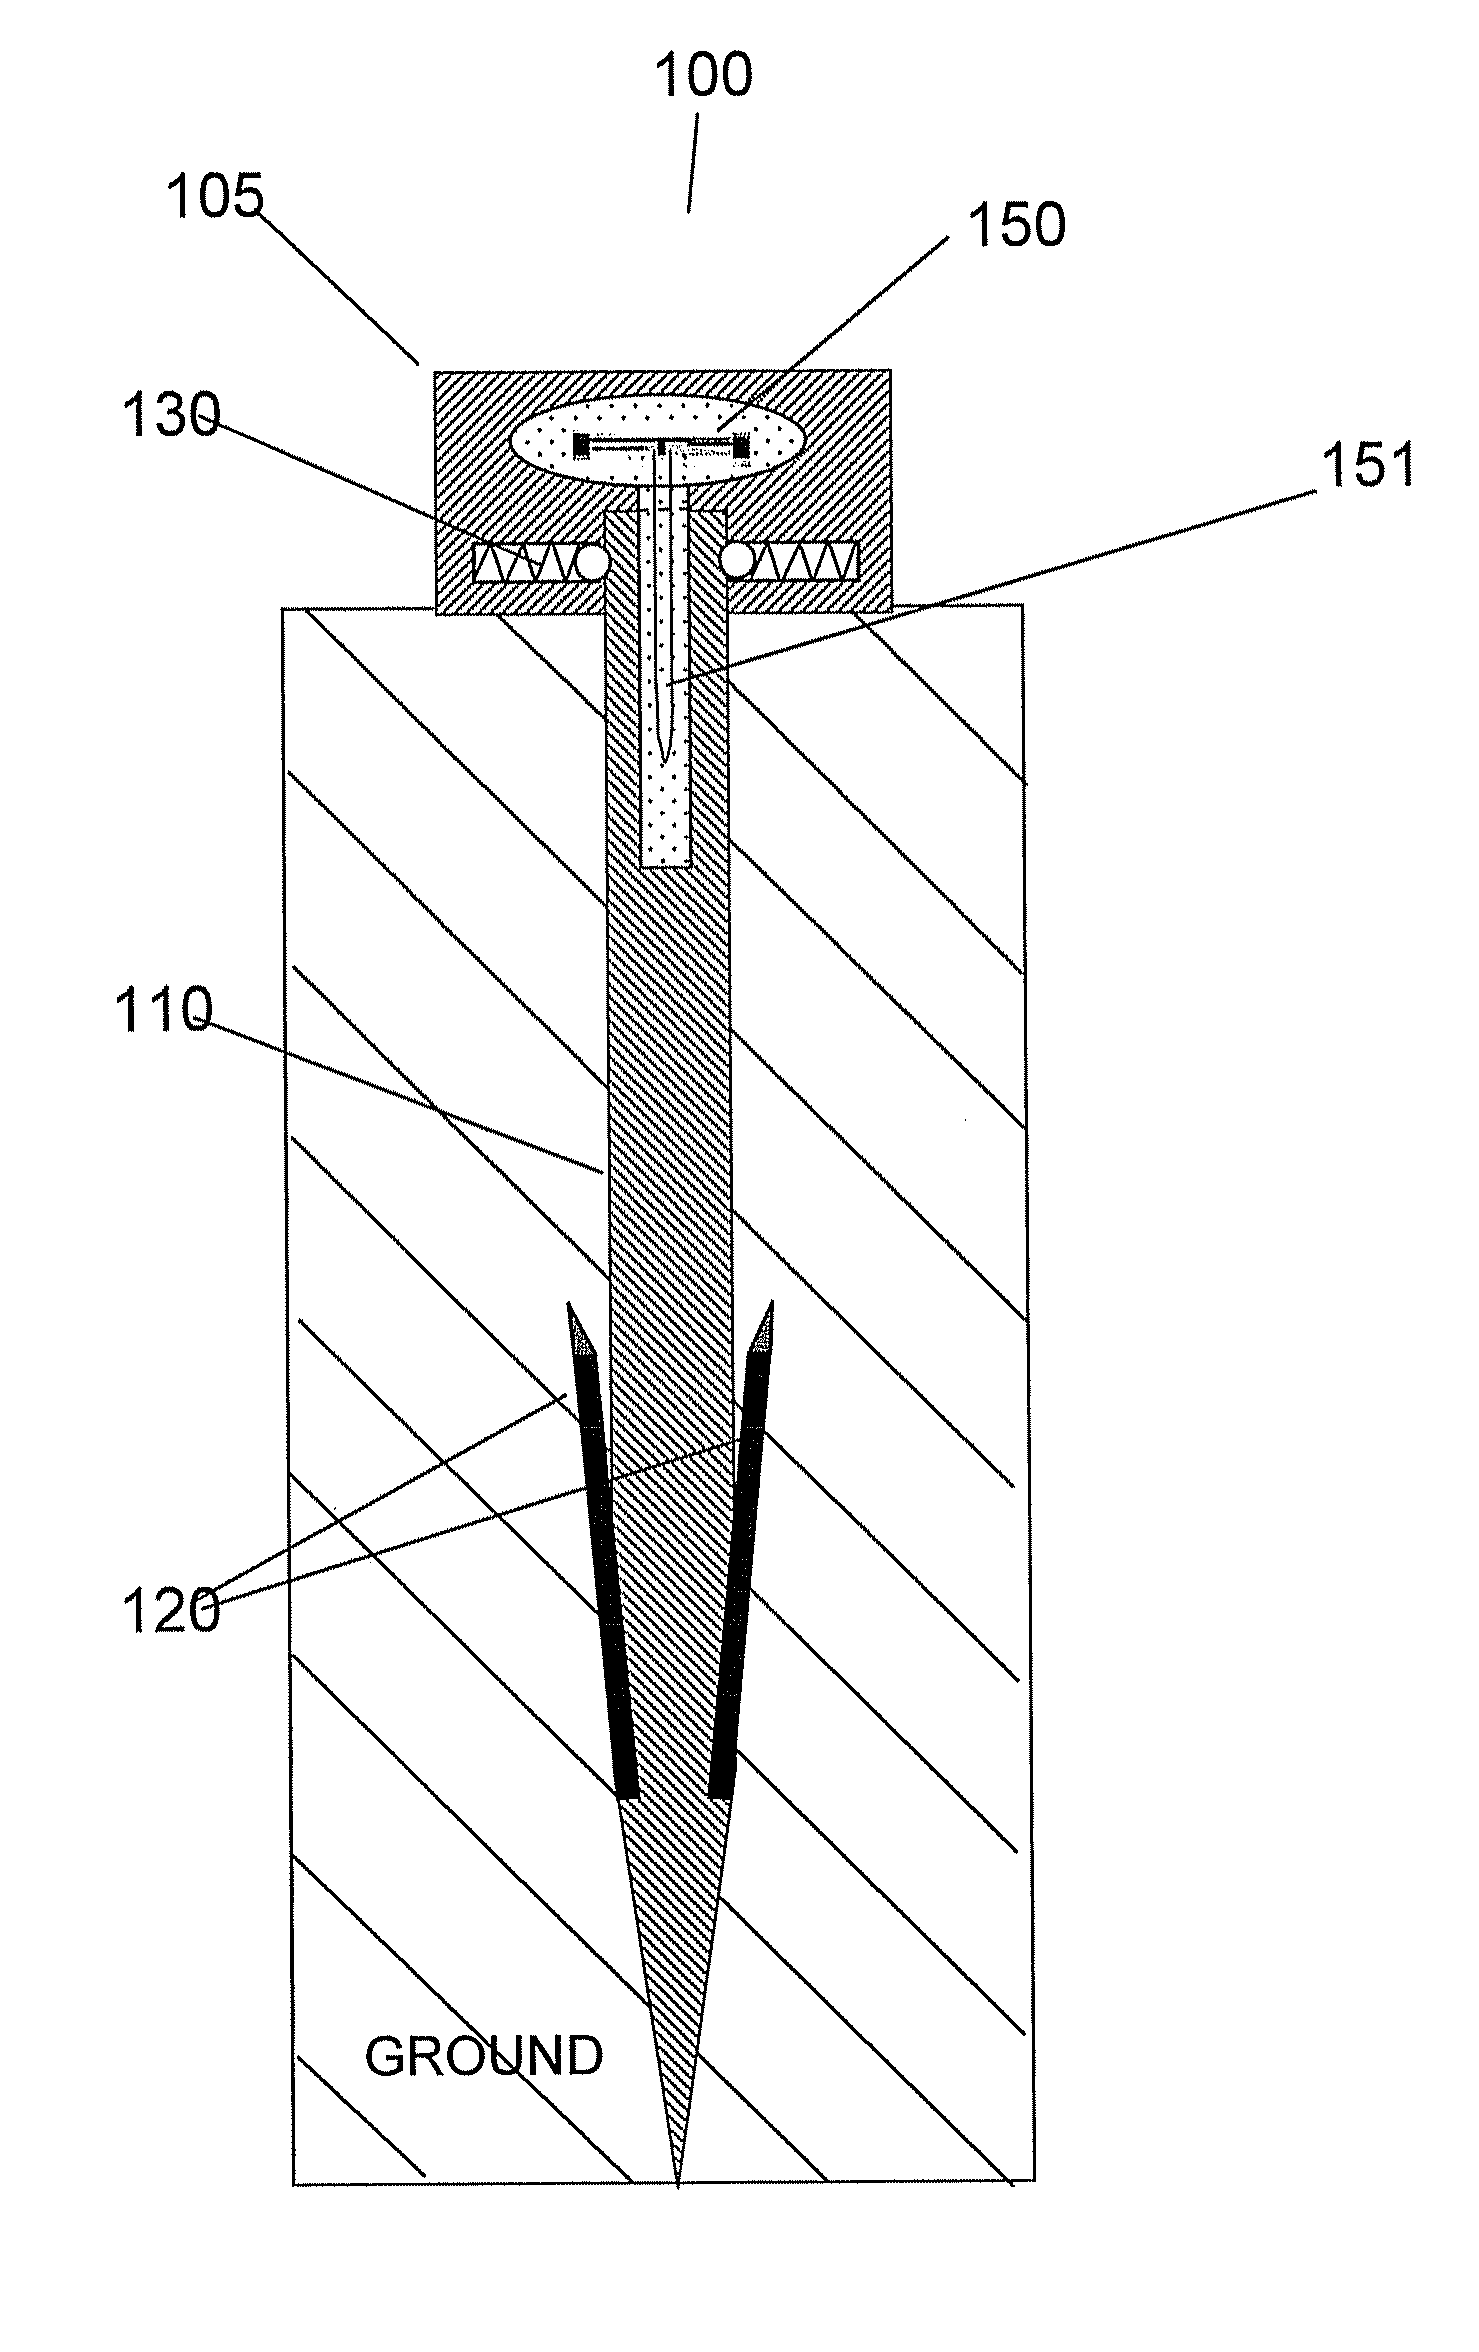 Apparatus for securing a land surveyor'S mark based on the use of a radio frequency identifier tag